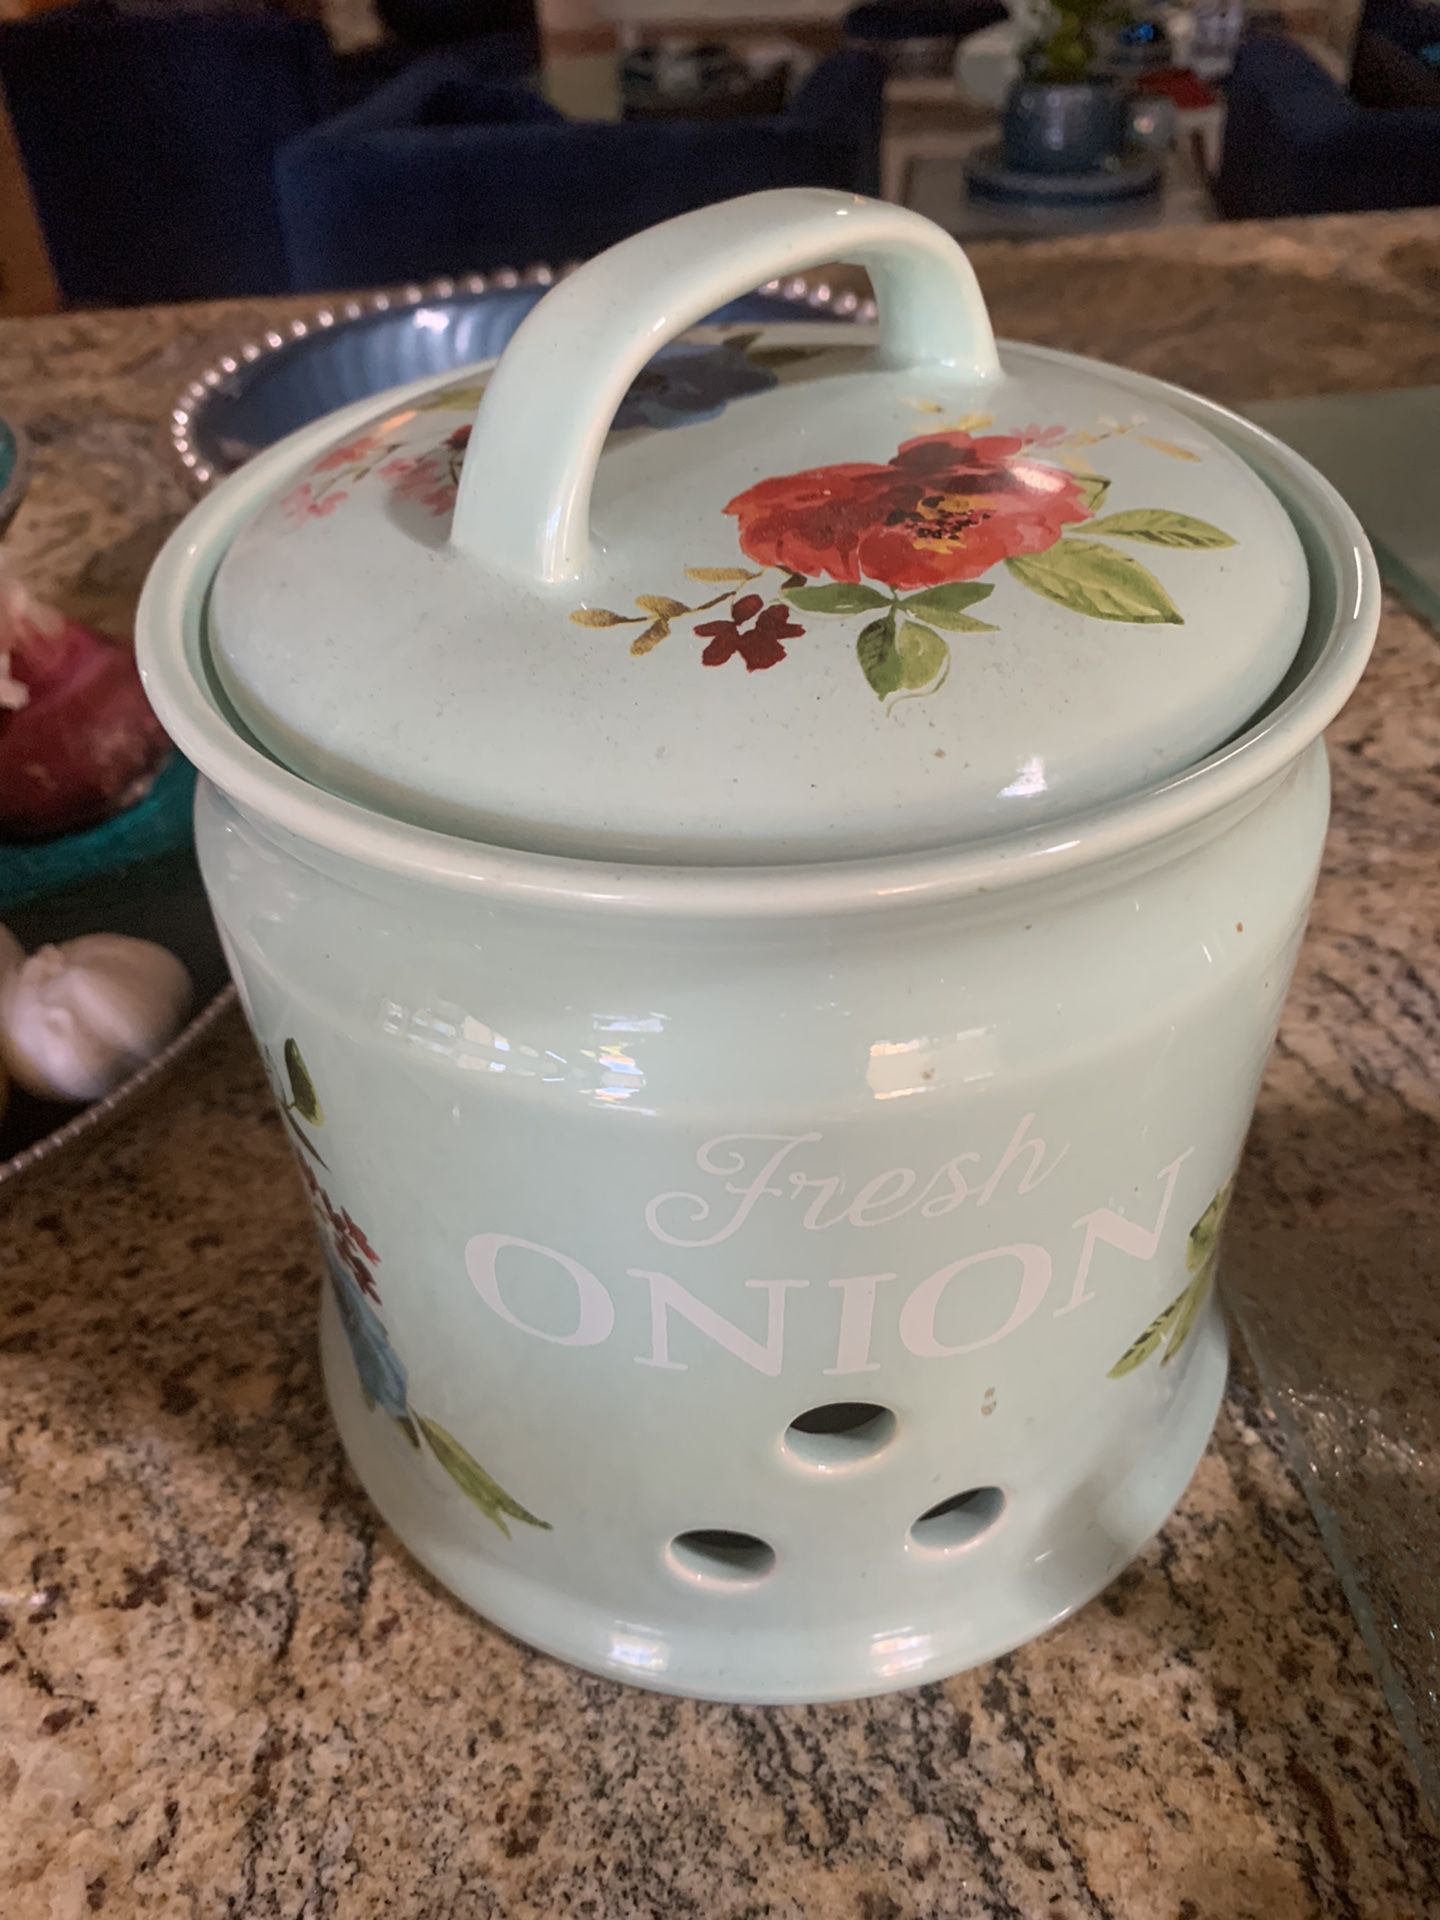 Onion Porcelain Painted Pot With Lid And Holes